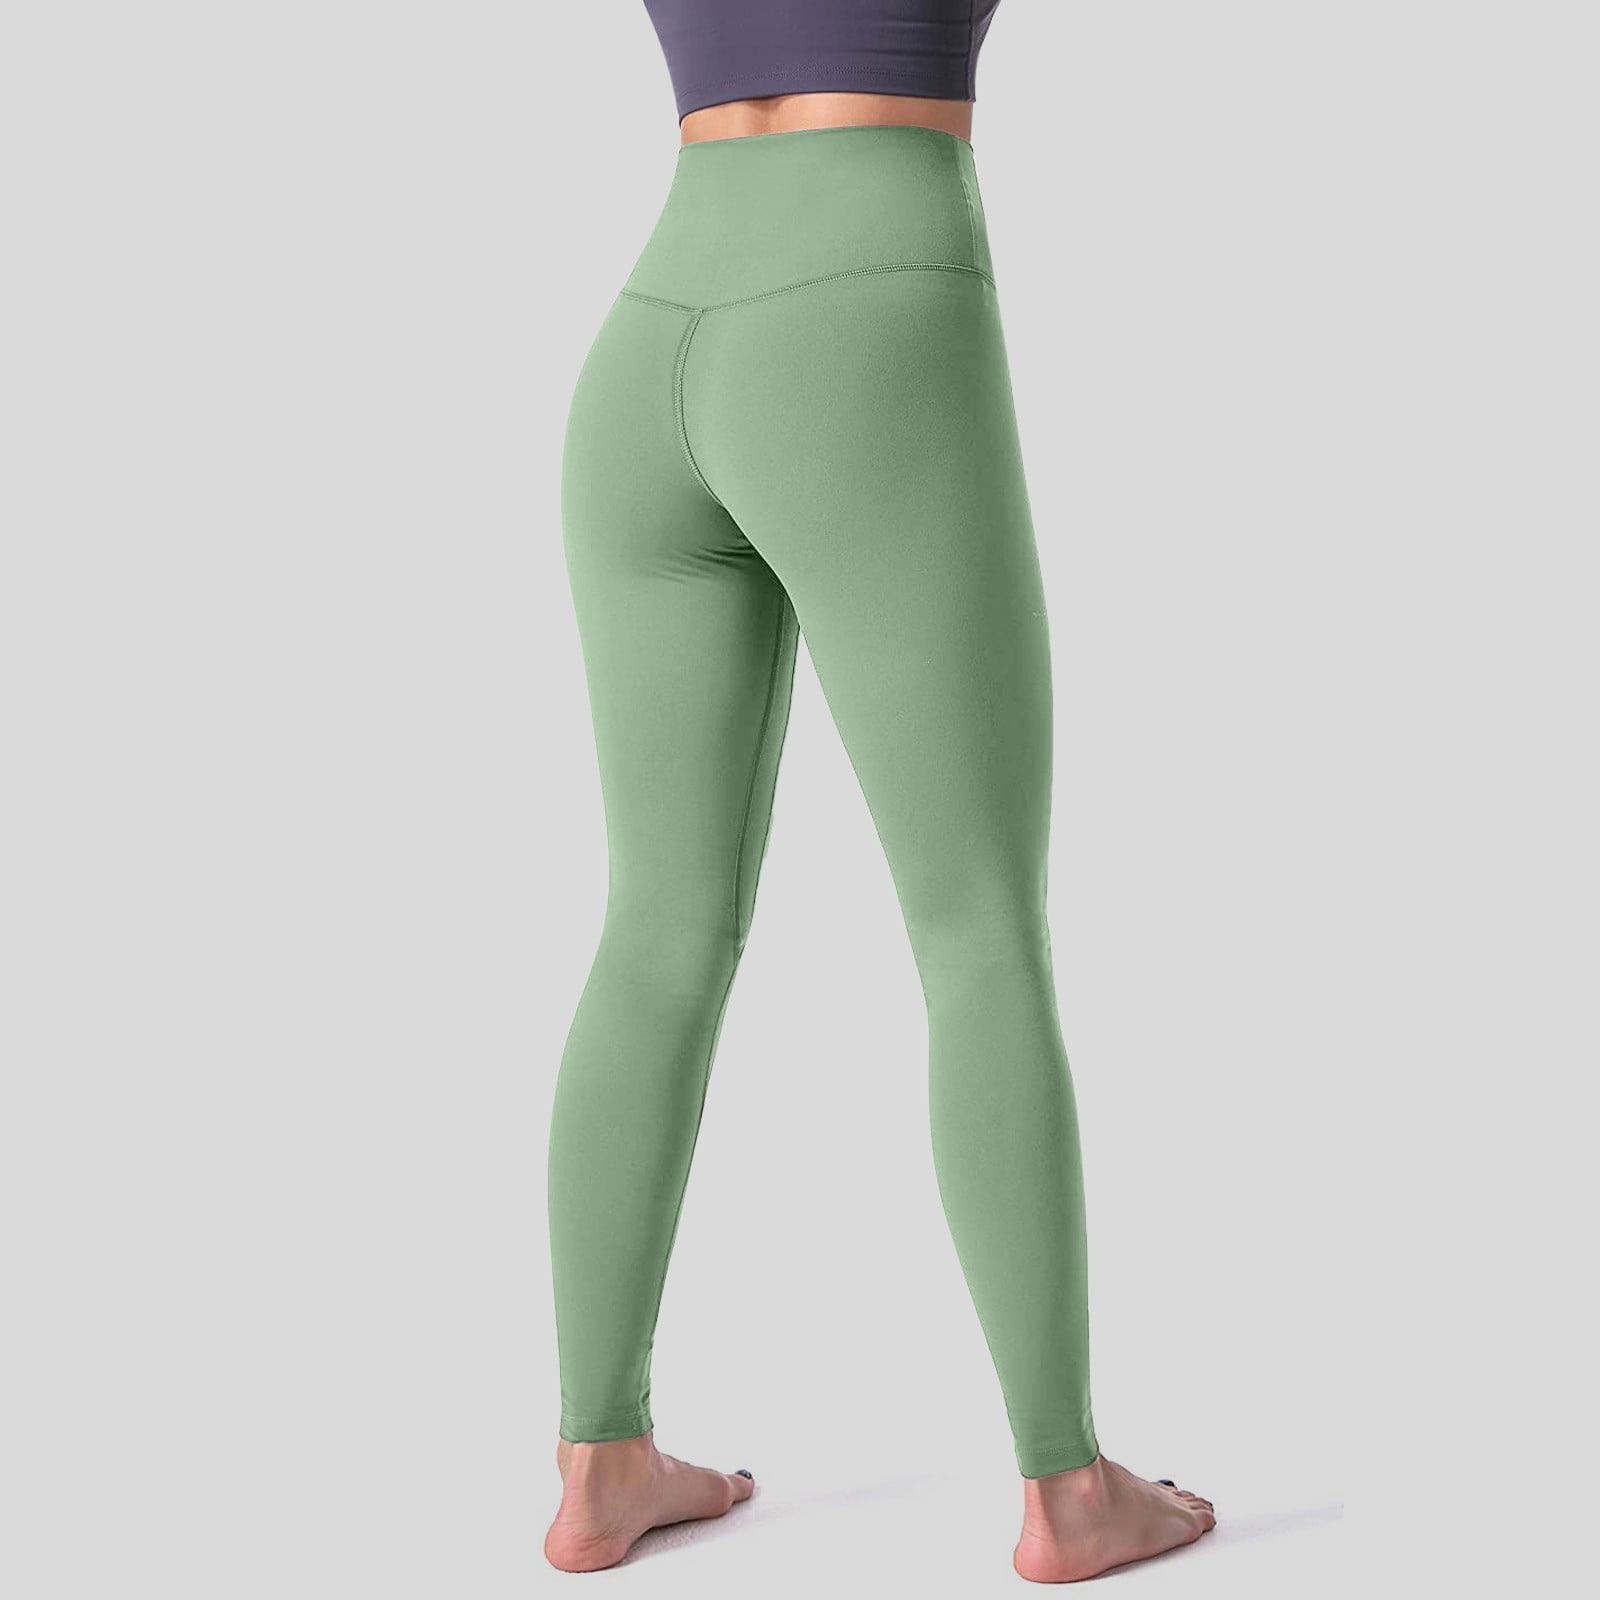 High Waisted Leggings for Women Pants Sports Pants Peach Tight